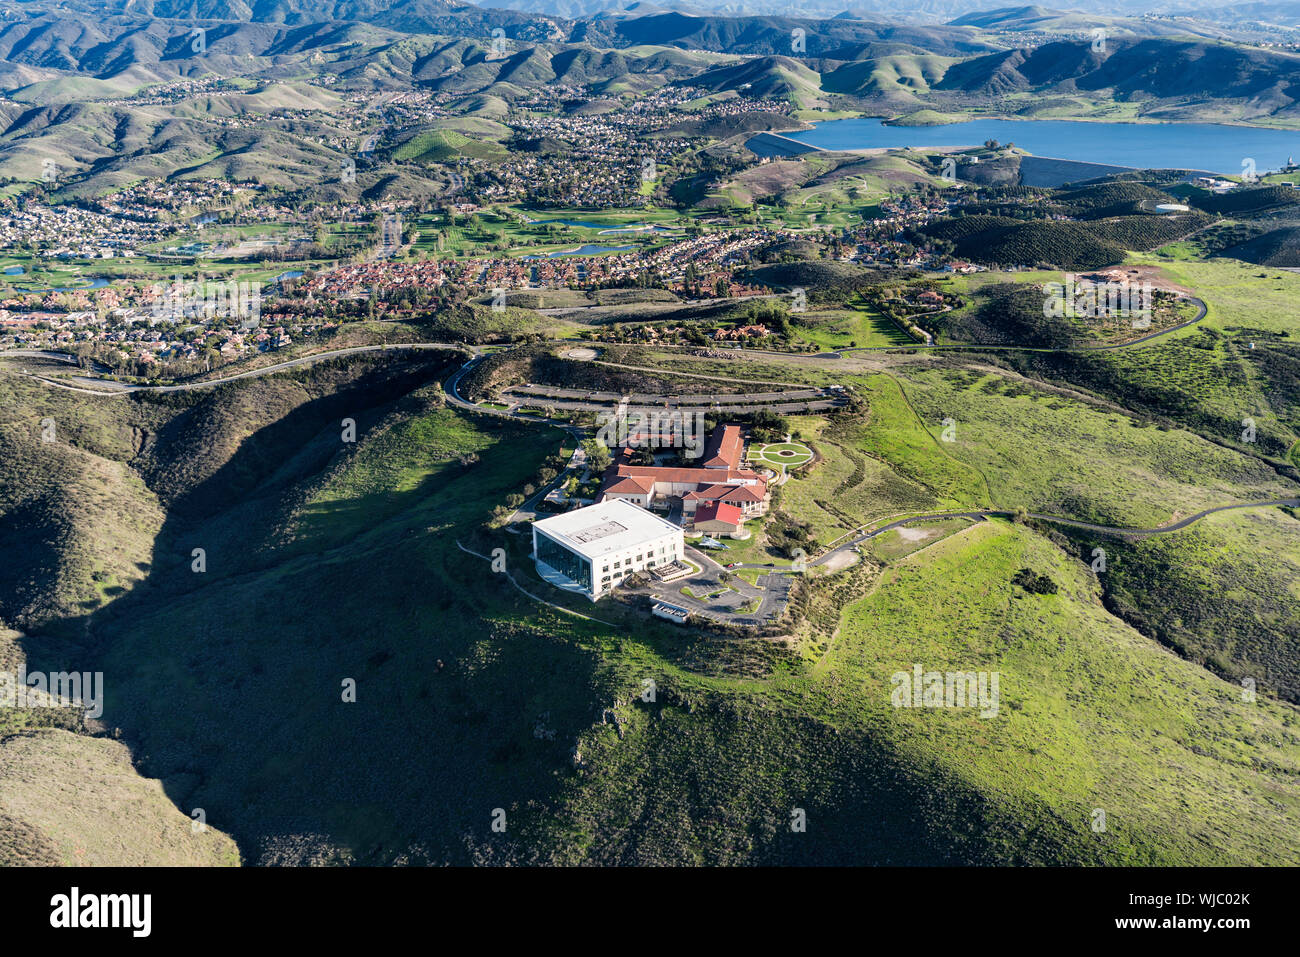 Simi Valley, California, USA - March 26, 2018:  Aerial view of Ronald Reagan Presidential Library and Center for Public Affairs near Los Angeles in Ve Stock Photo